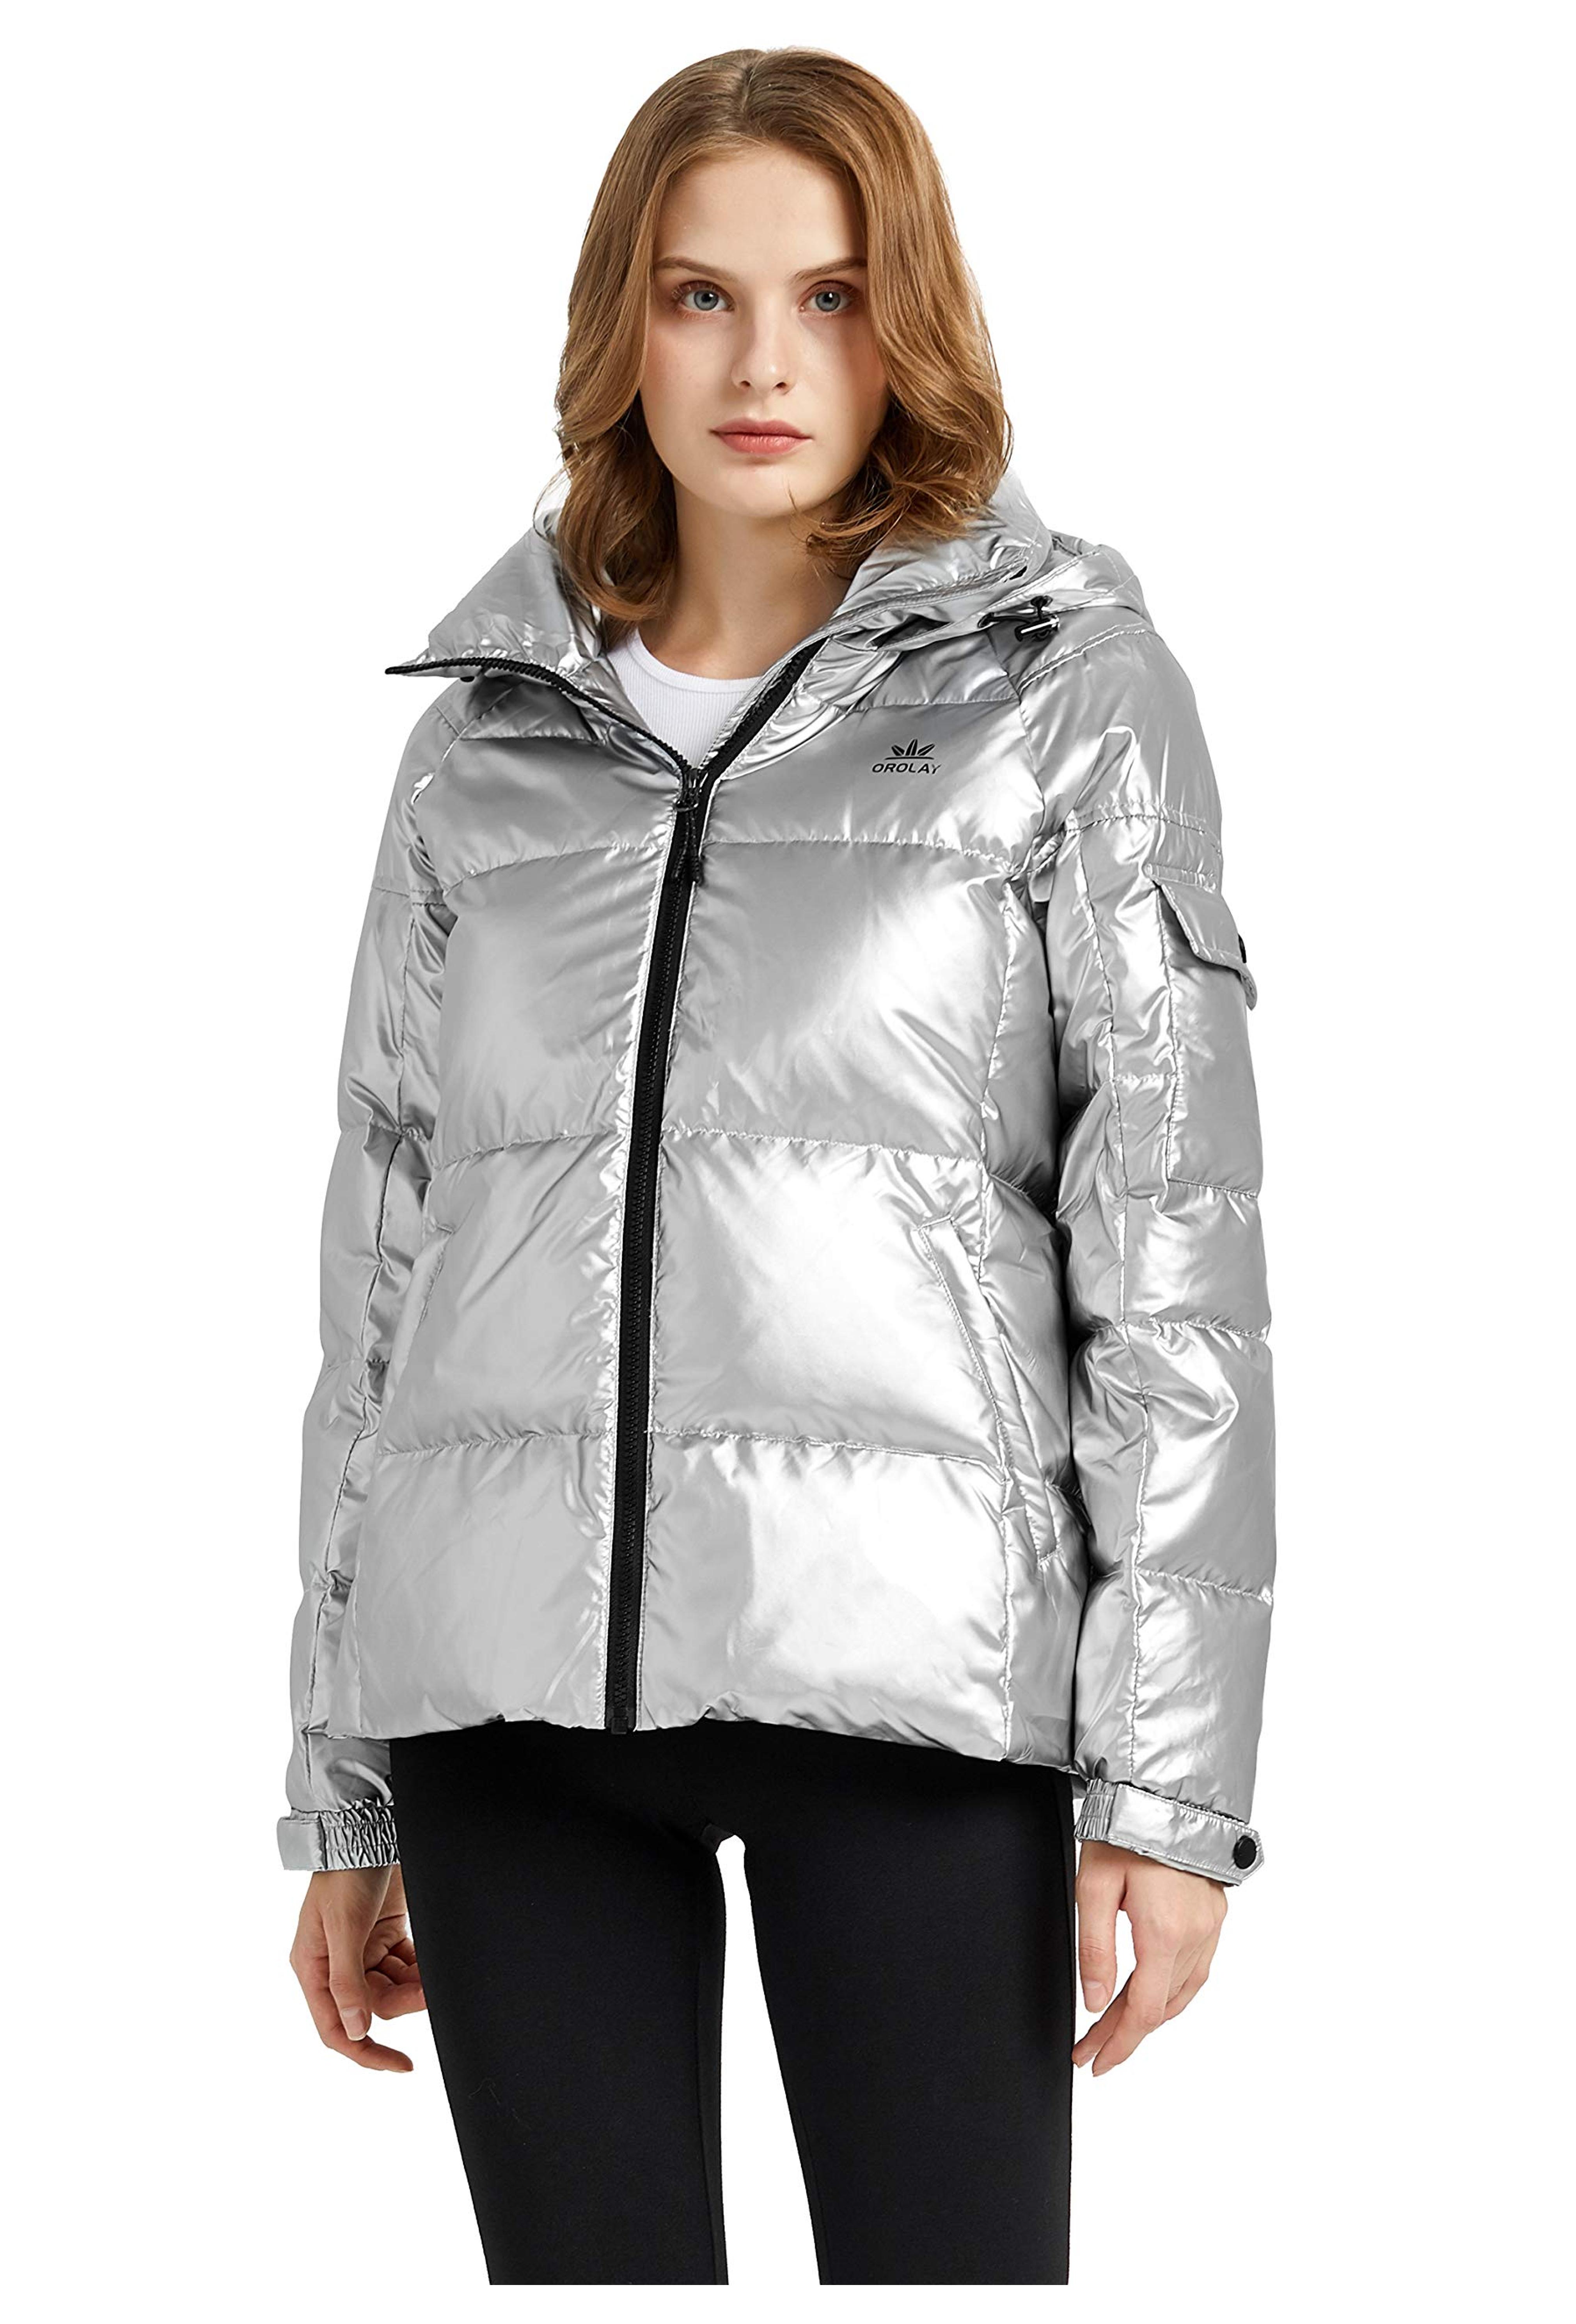 Amazon.com: Orolay Women's Winter Down Coat Metallic Hooded Puffer Jacket : Clothing, Shoes & Jewelry